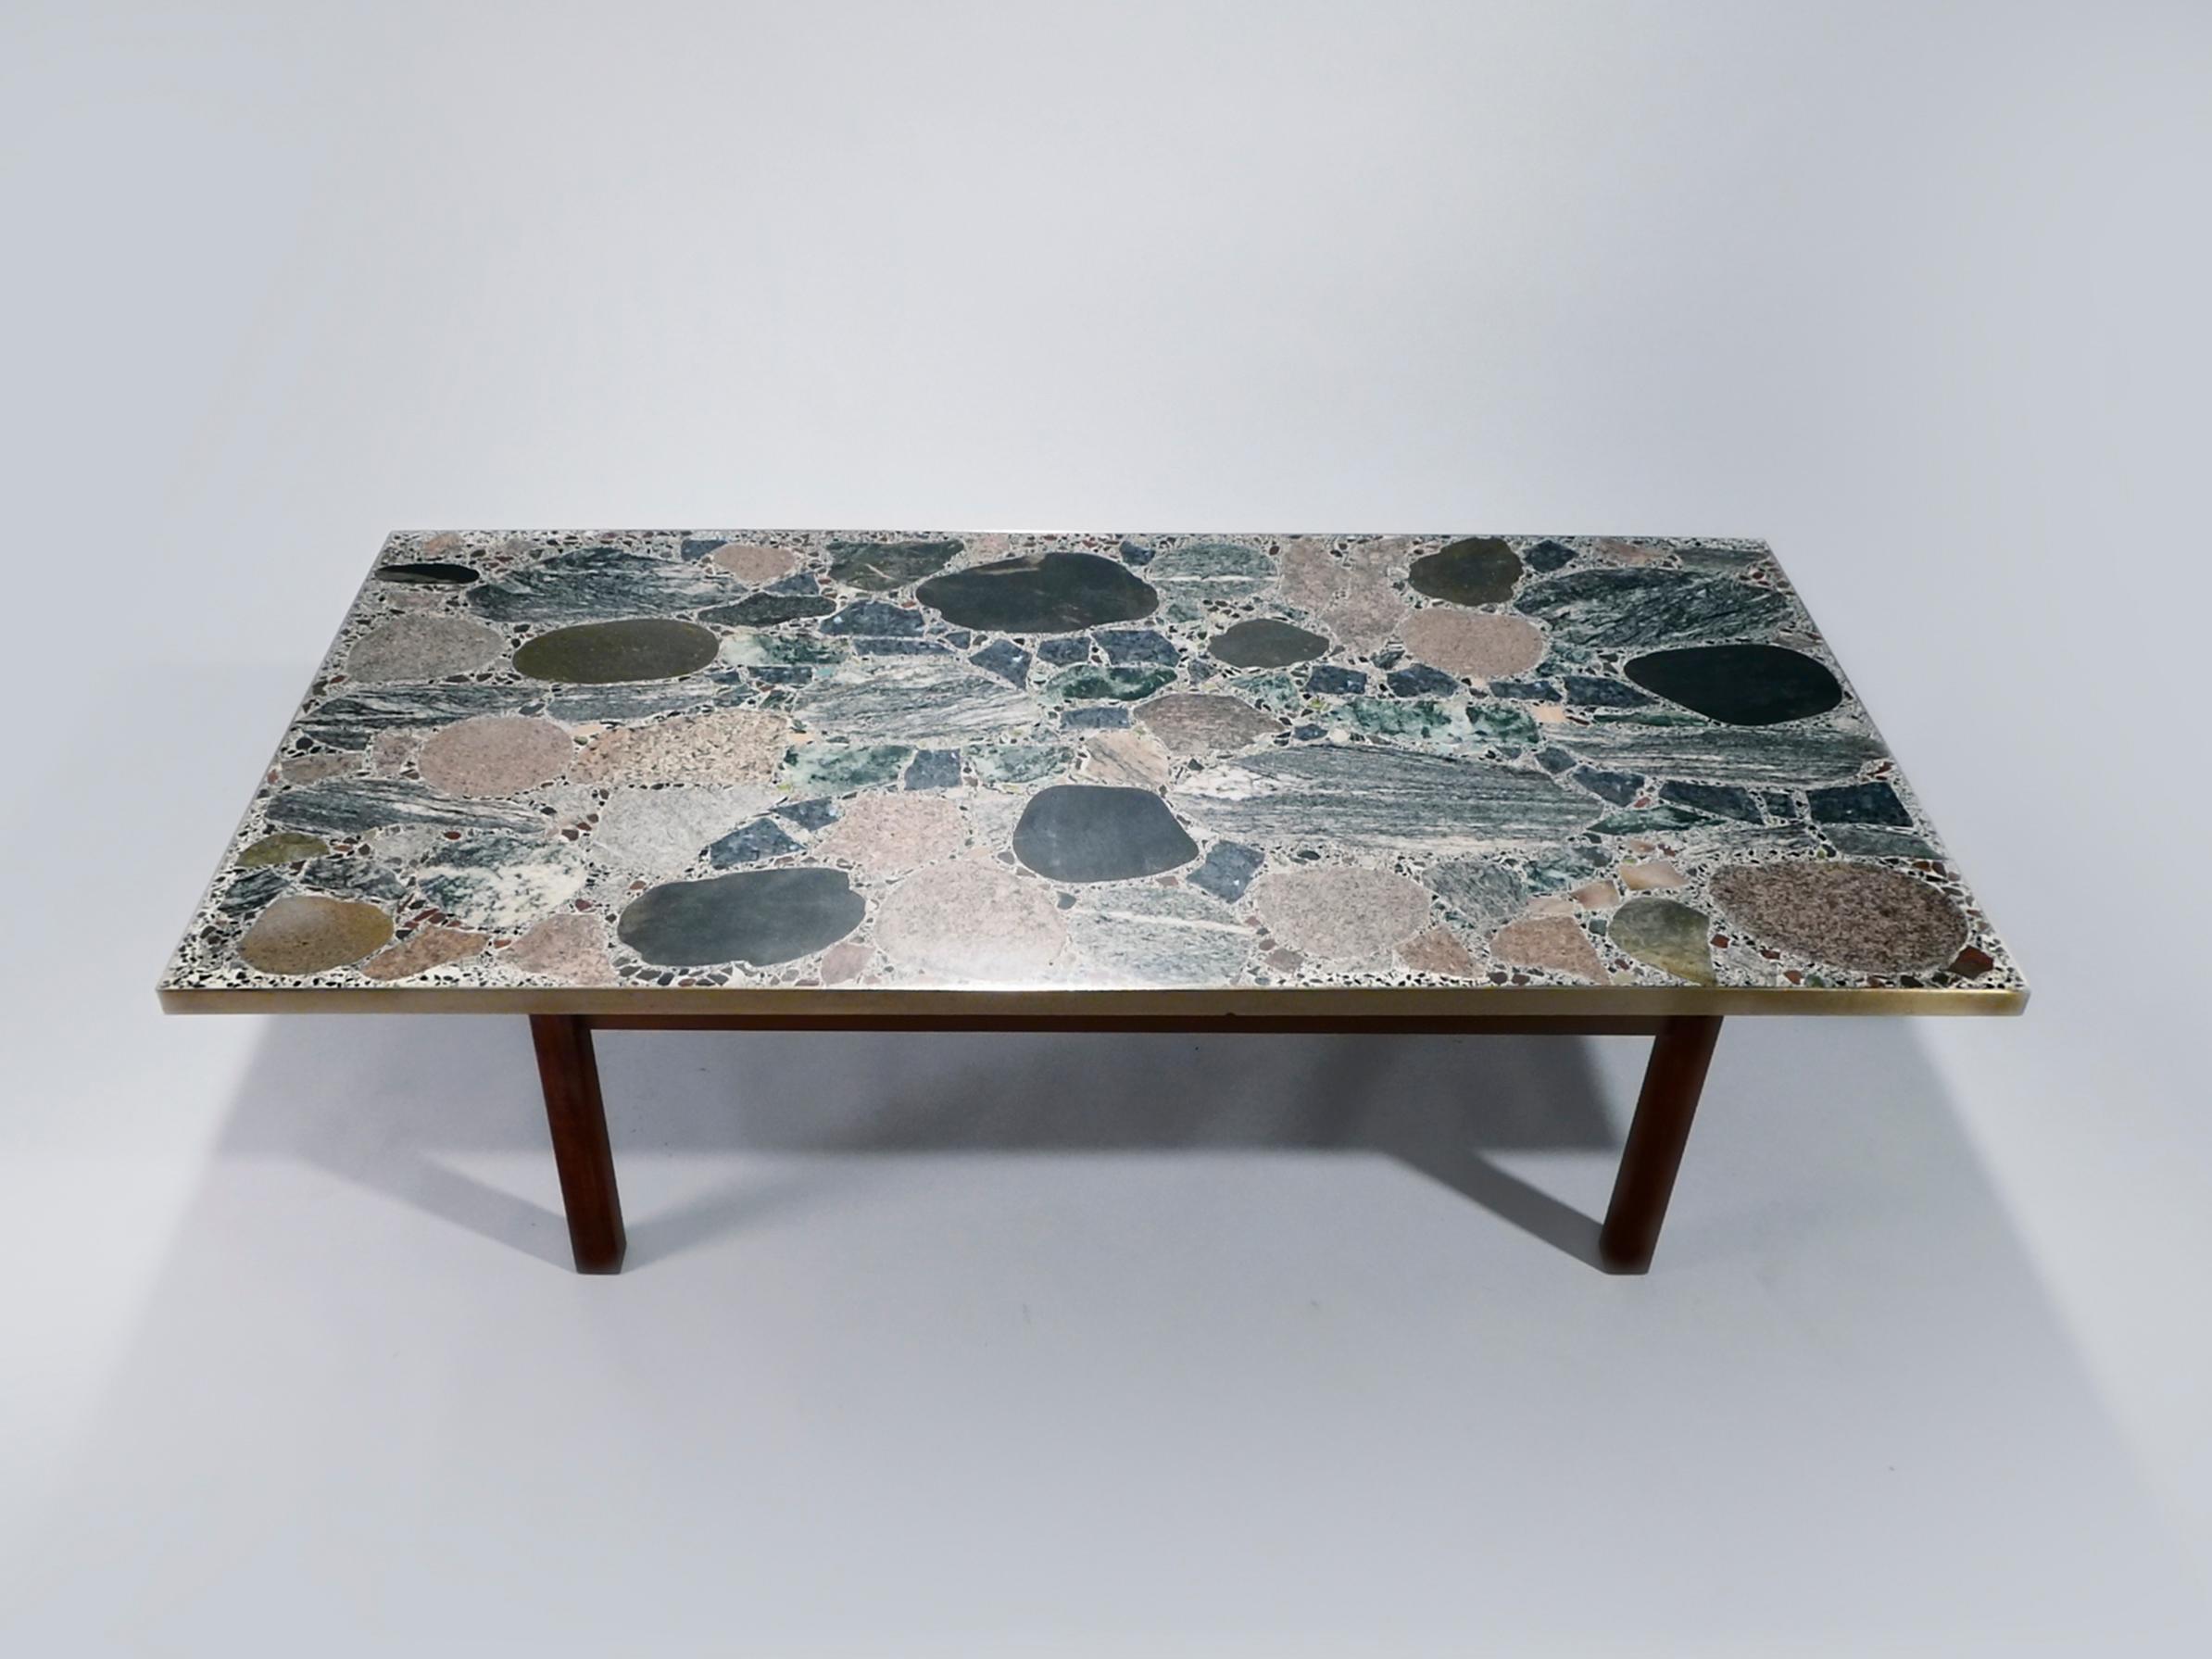 The thick surface of this coffee table is intriguing, created from heavy, multicolored stones. The result is a sophisticated, naturalist look that is complemented by strong, unadorned teak feet and brass frame. Chic, Scandinavian style is